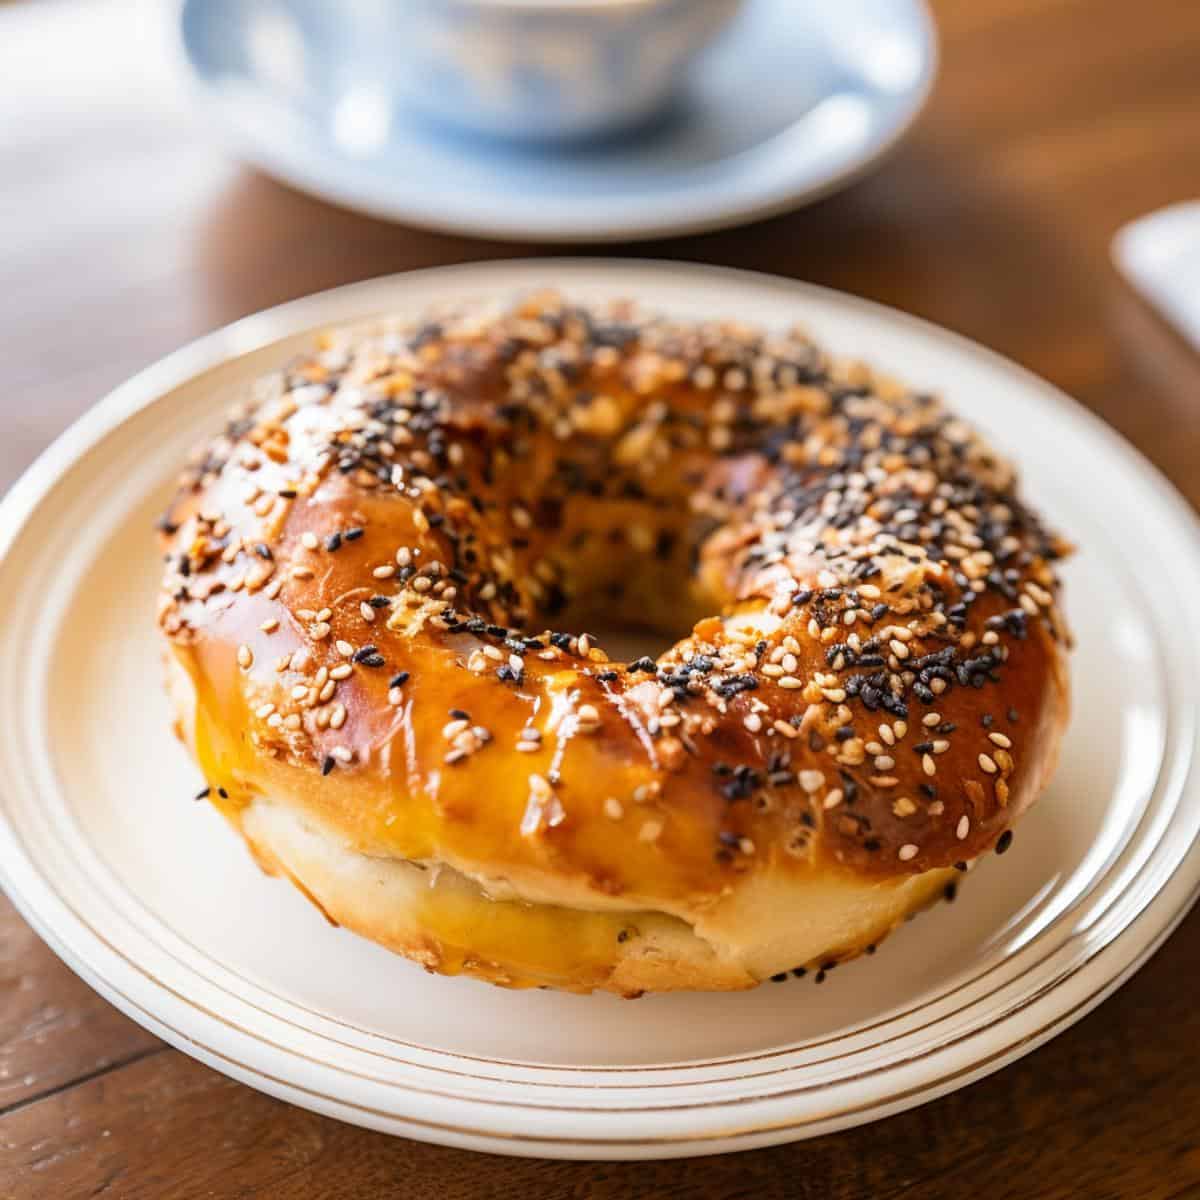 Montrealstyle Bagel on a kitchen counter